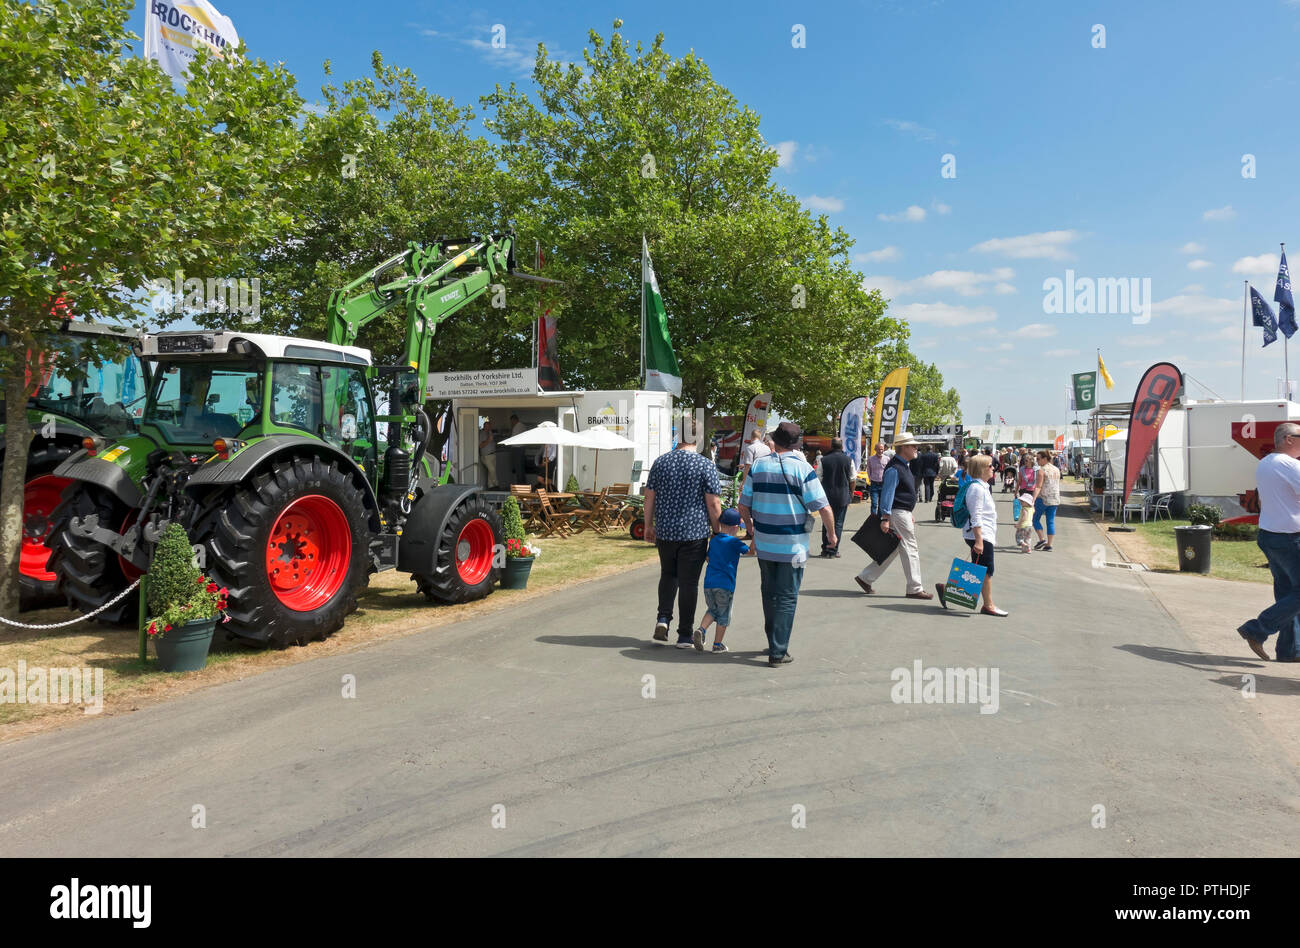 People visiting agricultural machinery and farming equipment stands Great Yorkshire Show Harrogate North Yorkshire England UK United Kingdom Britain Stock Photo